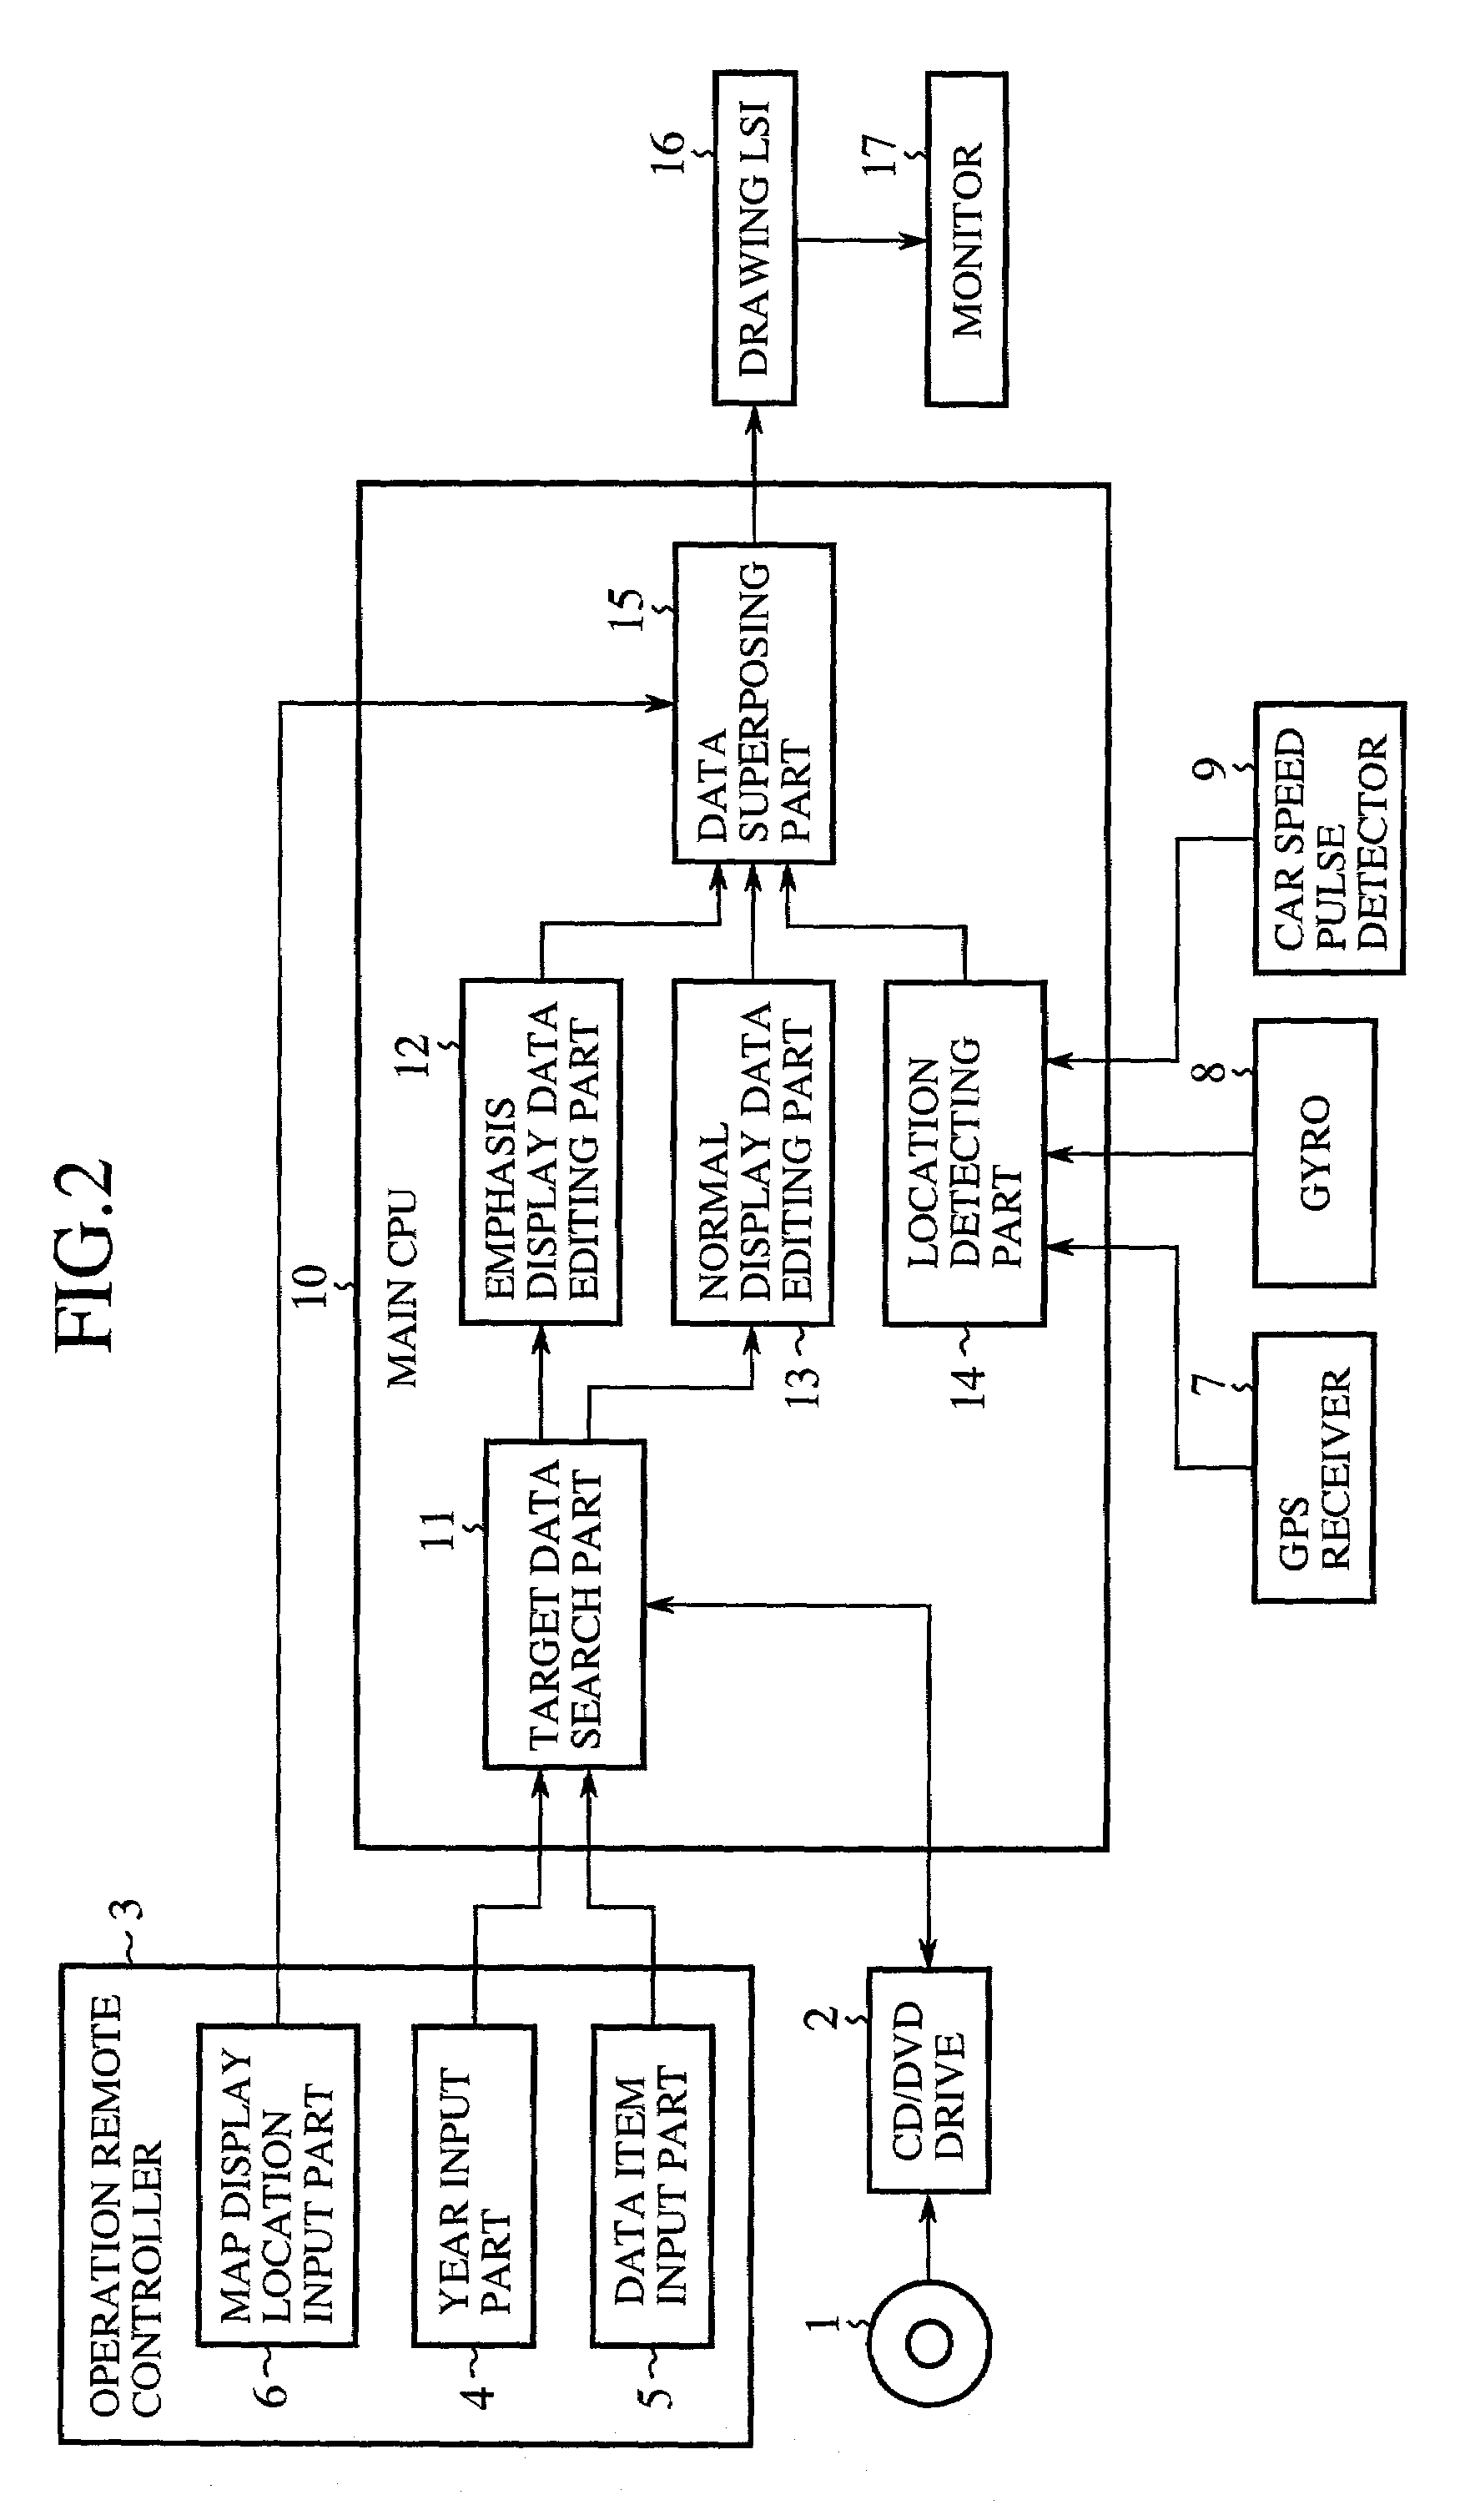 Navigation device for displaying dated map data